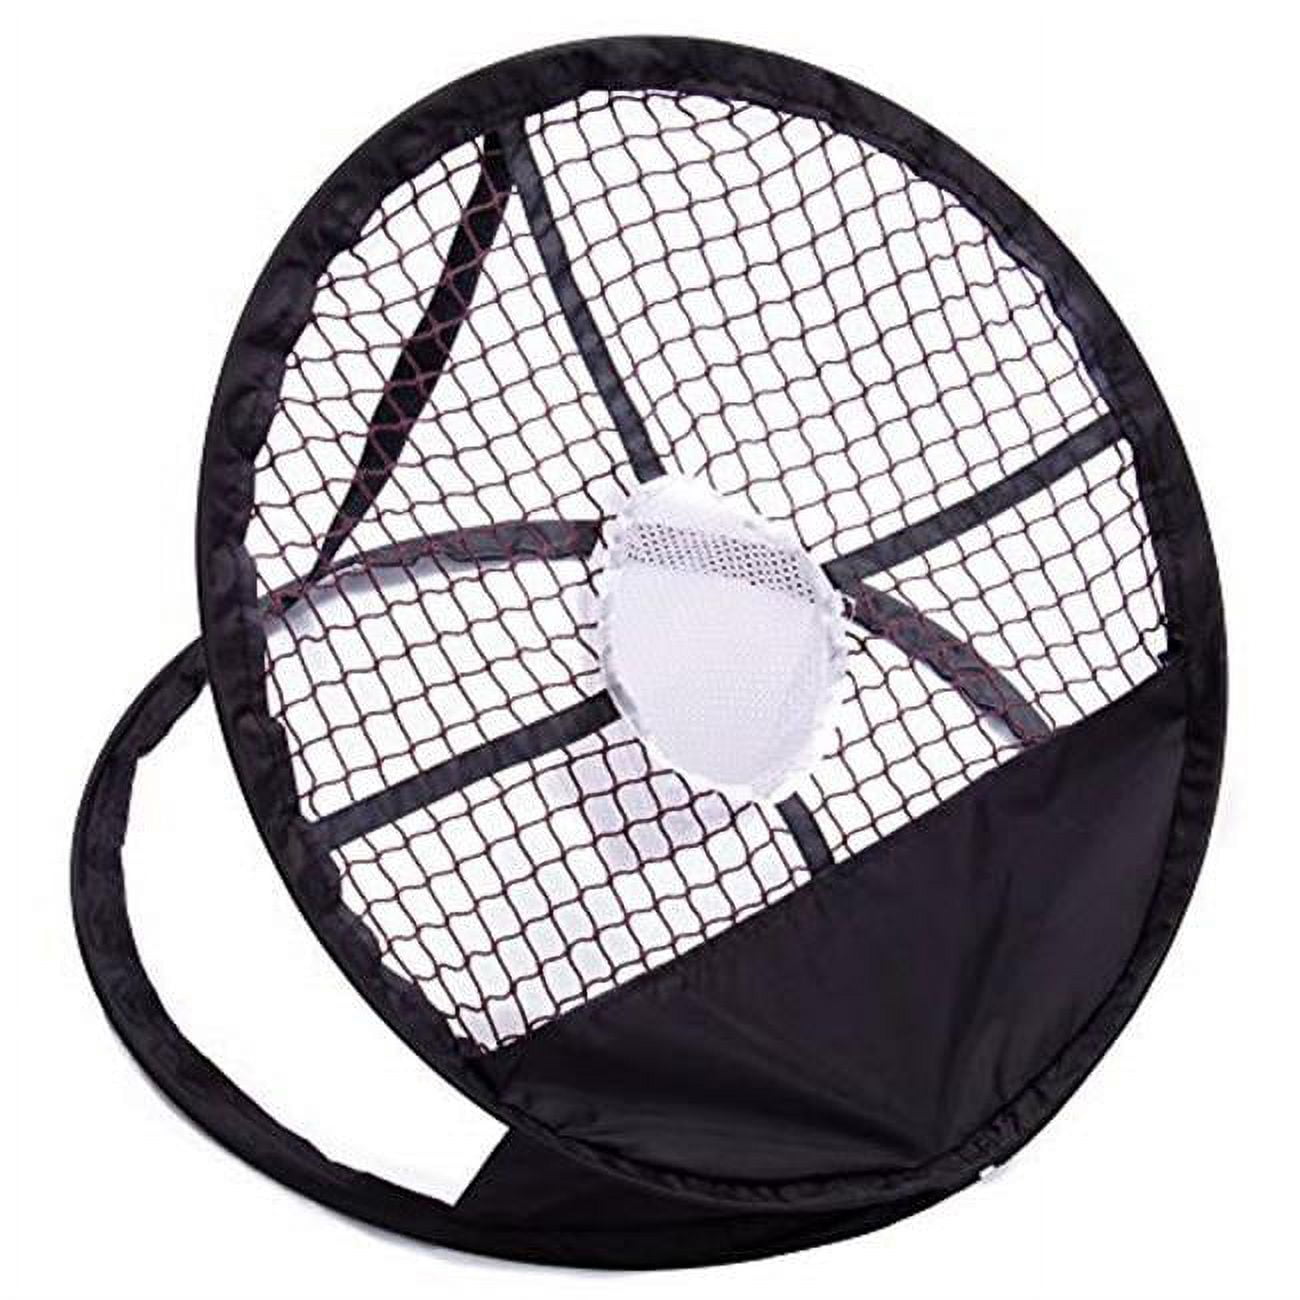 Picture of Brybelly SGLF-101 Pop-up Golf Rebounder with Target